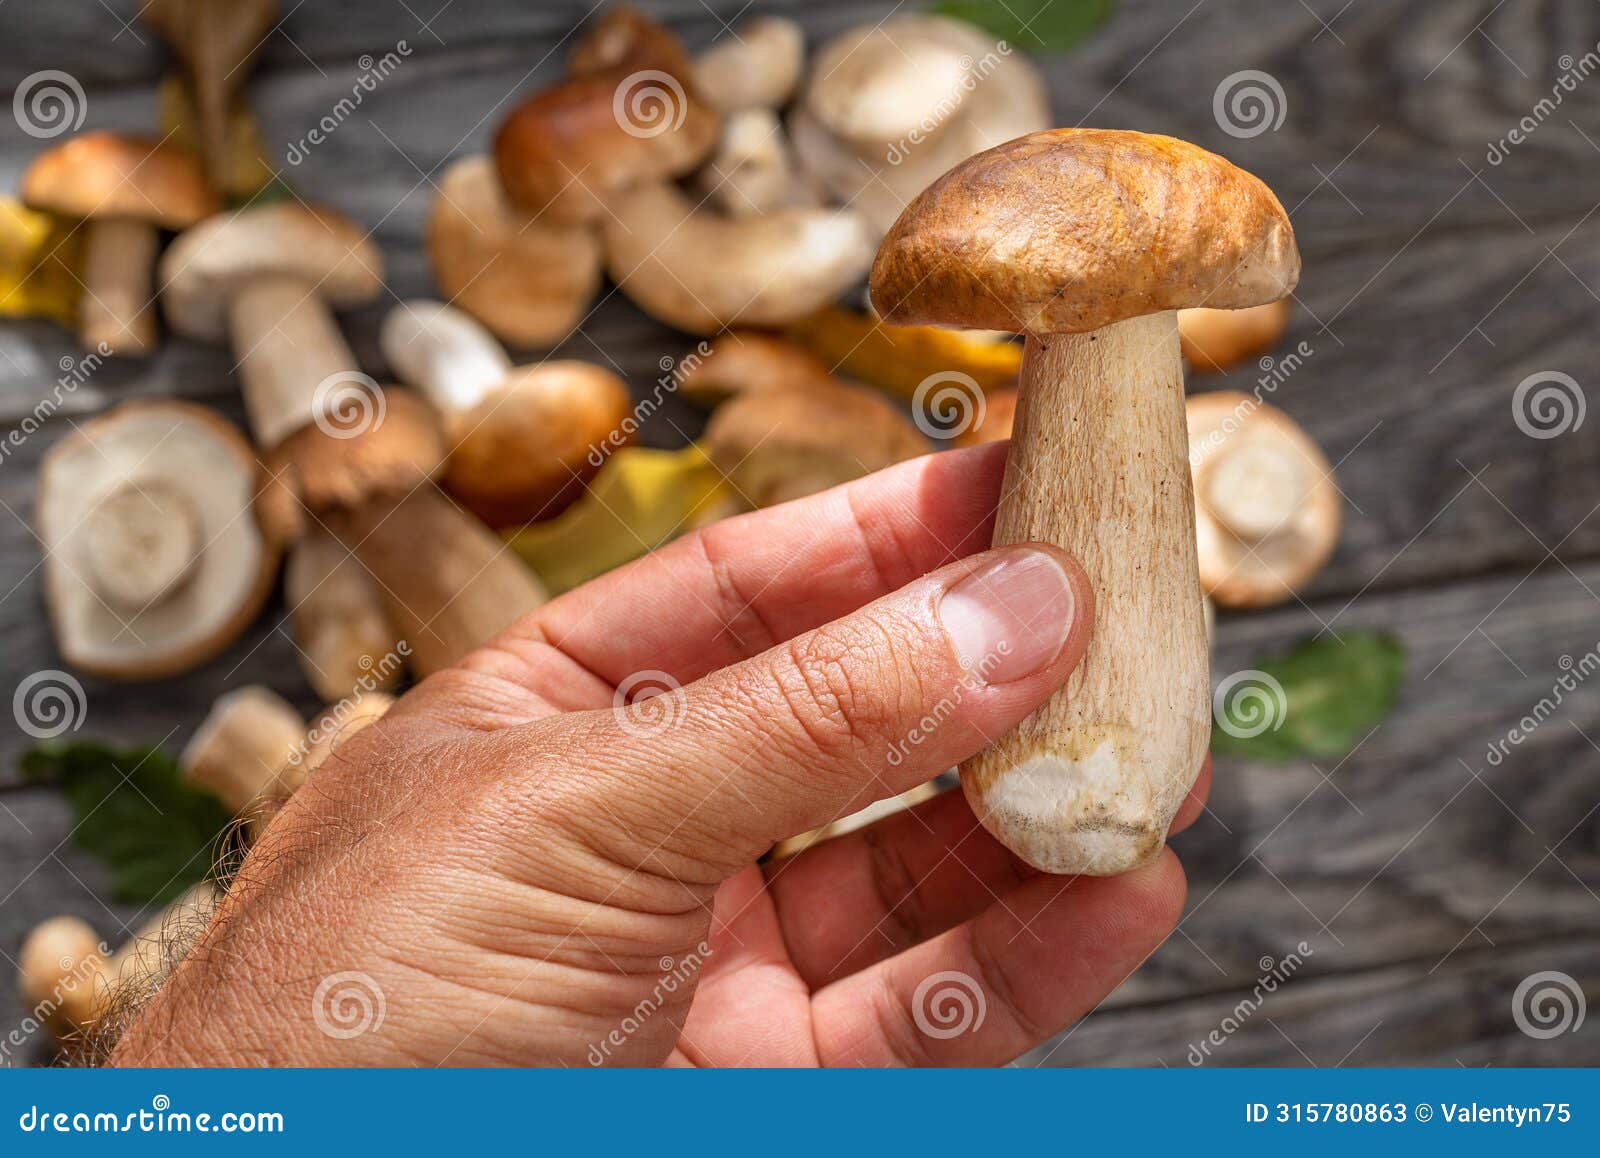 porcini in male hand close up and fresh harvest of porcini mushrooms on table at the background